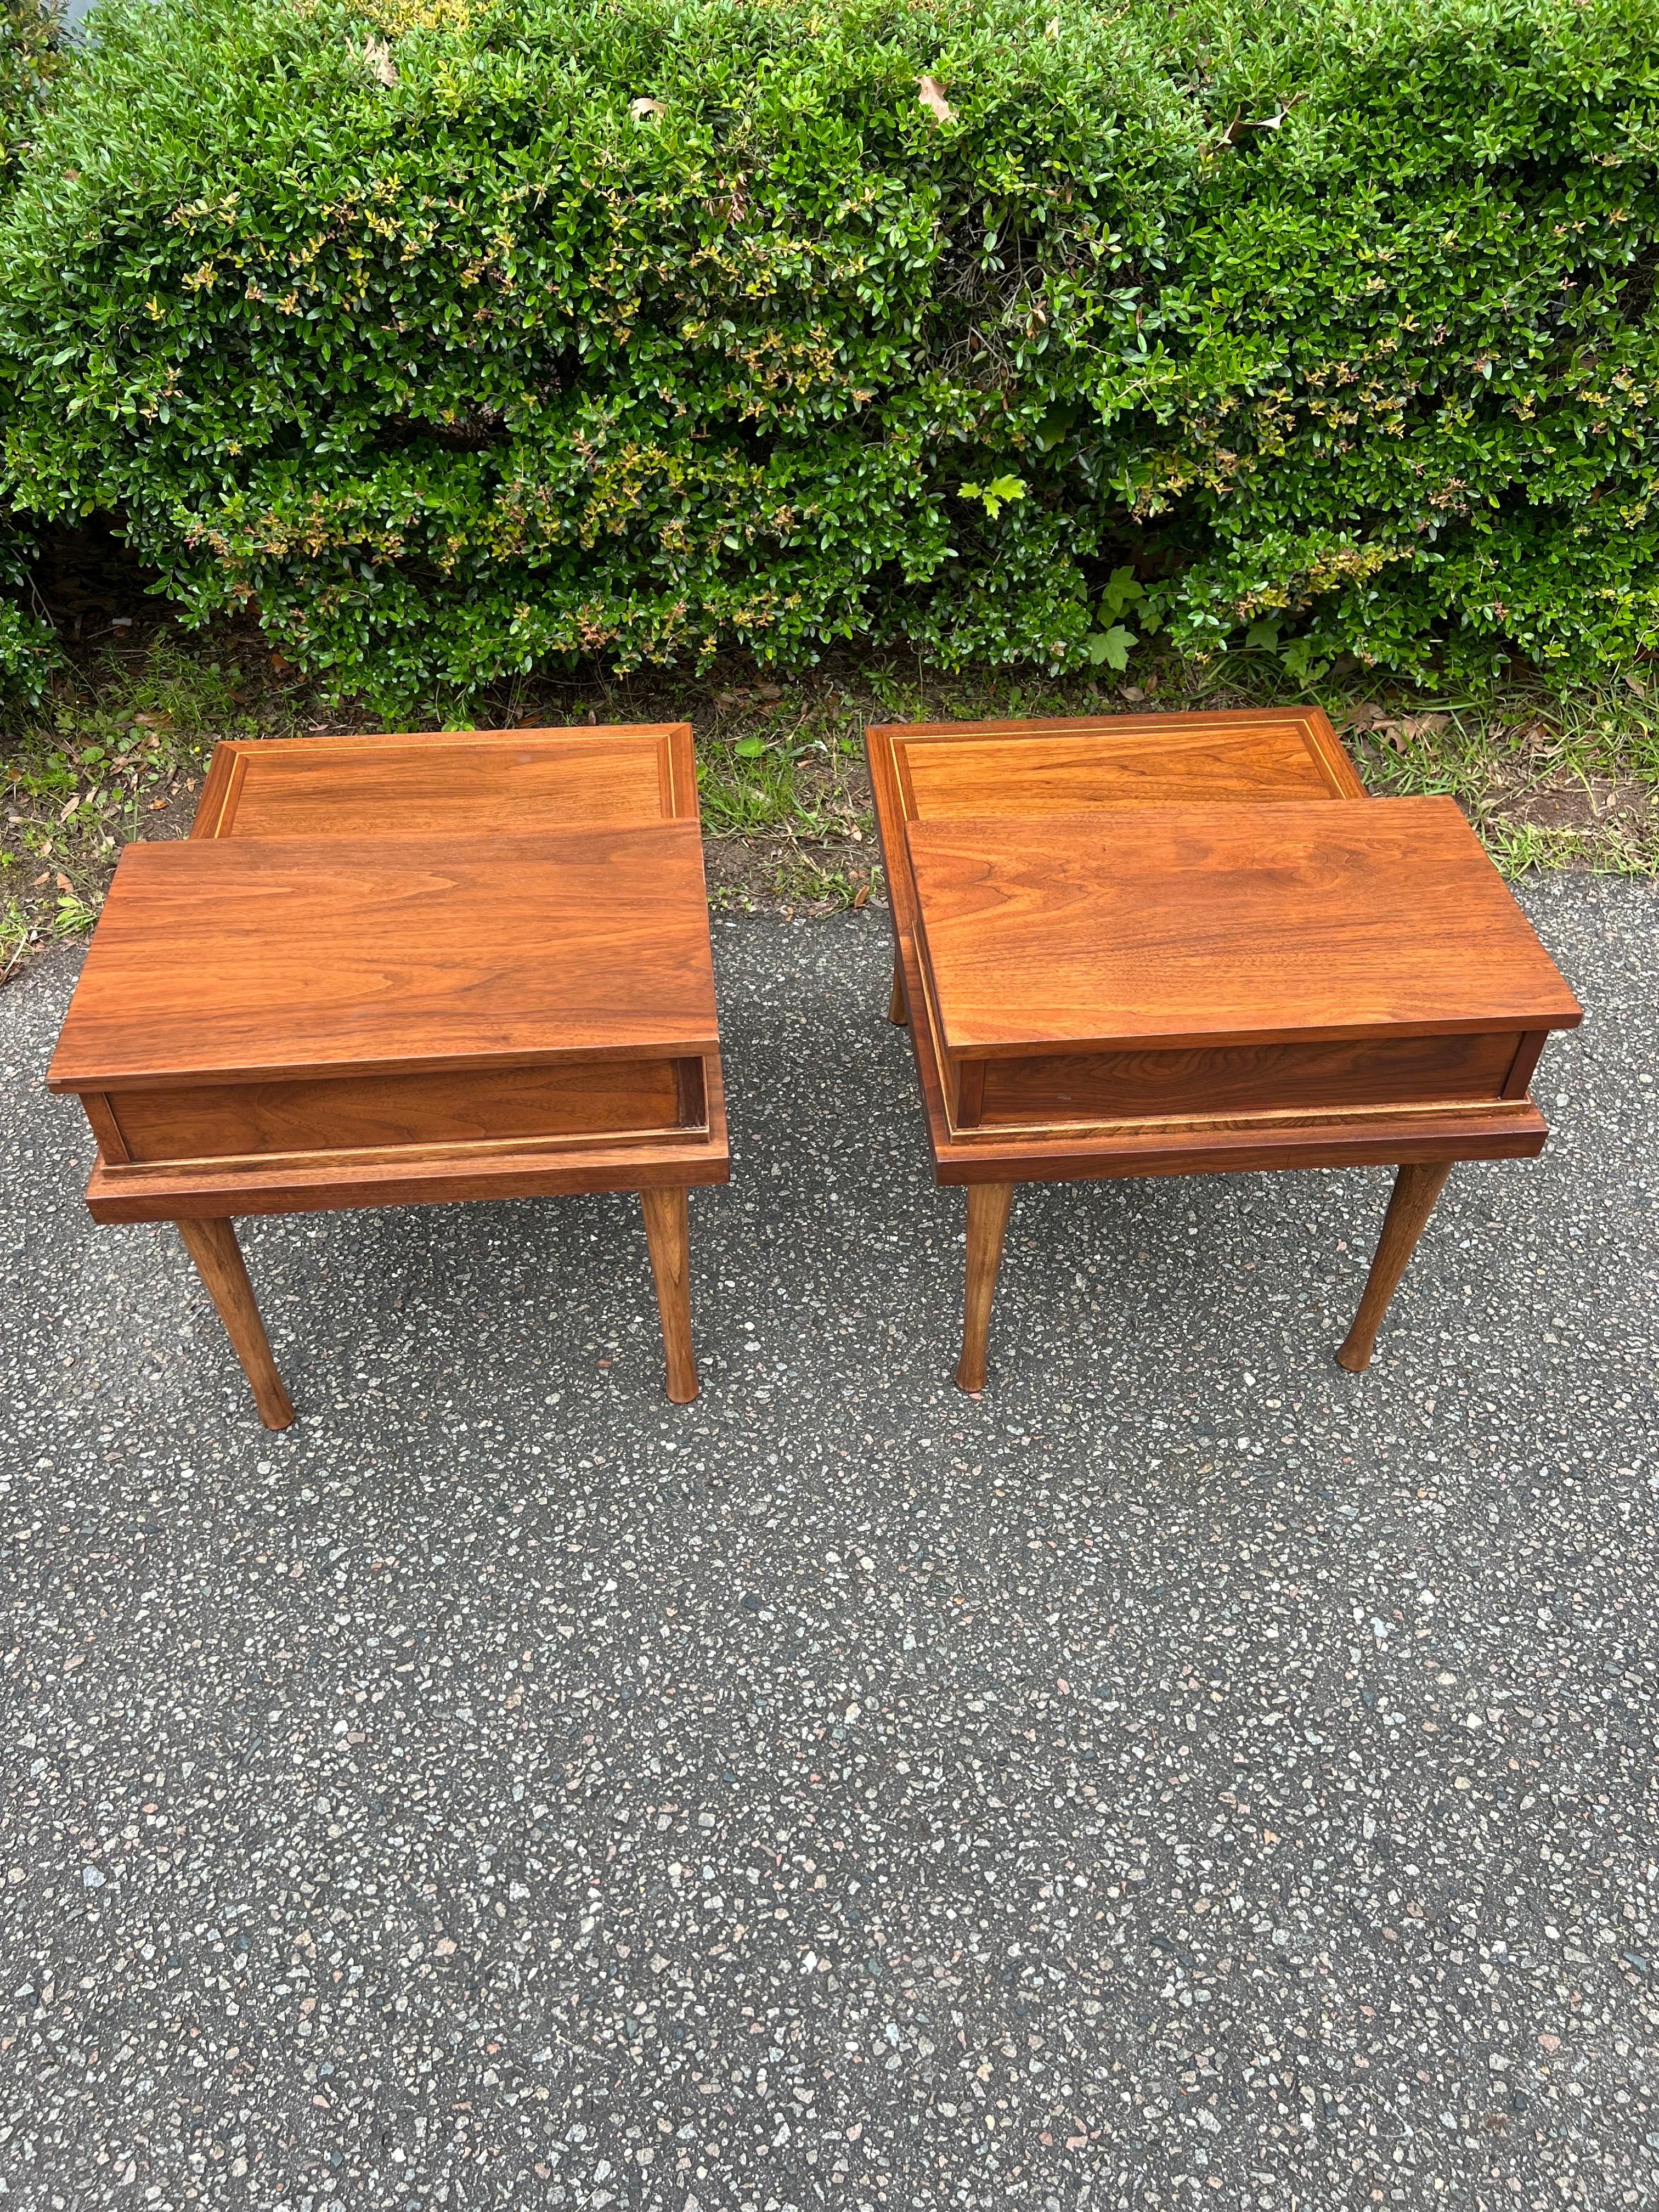 Pair of Mid-20th Century Modern American of Martinsville Side Tables For Sale 7